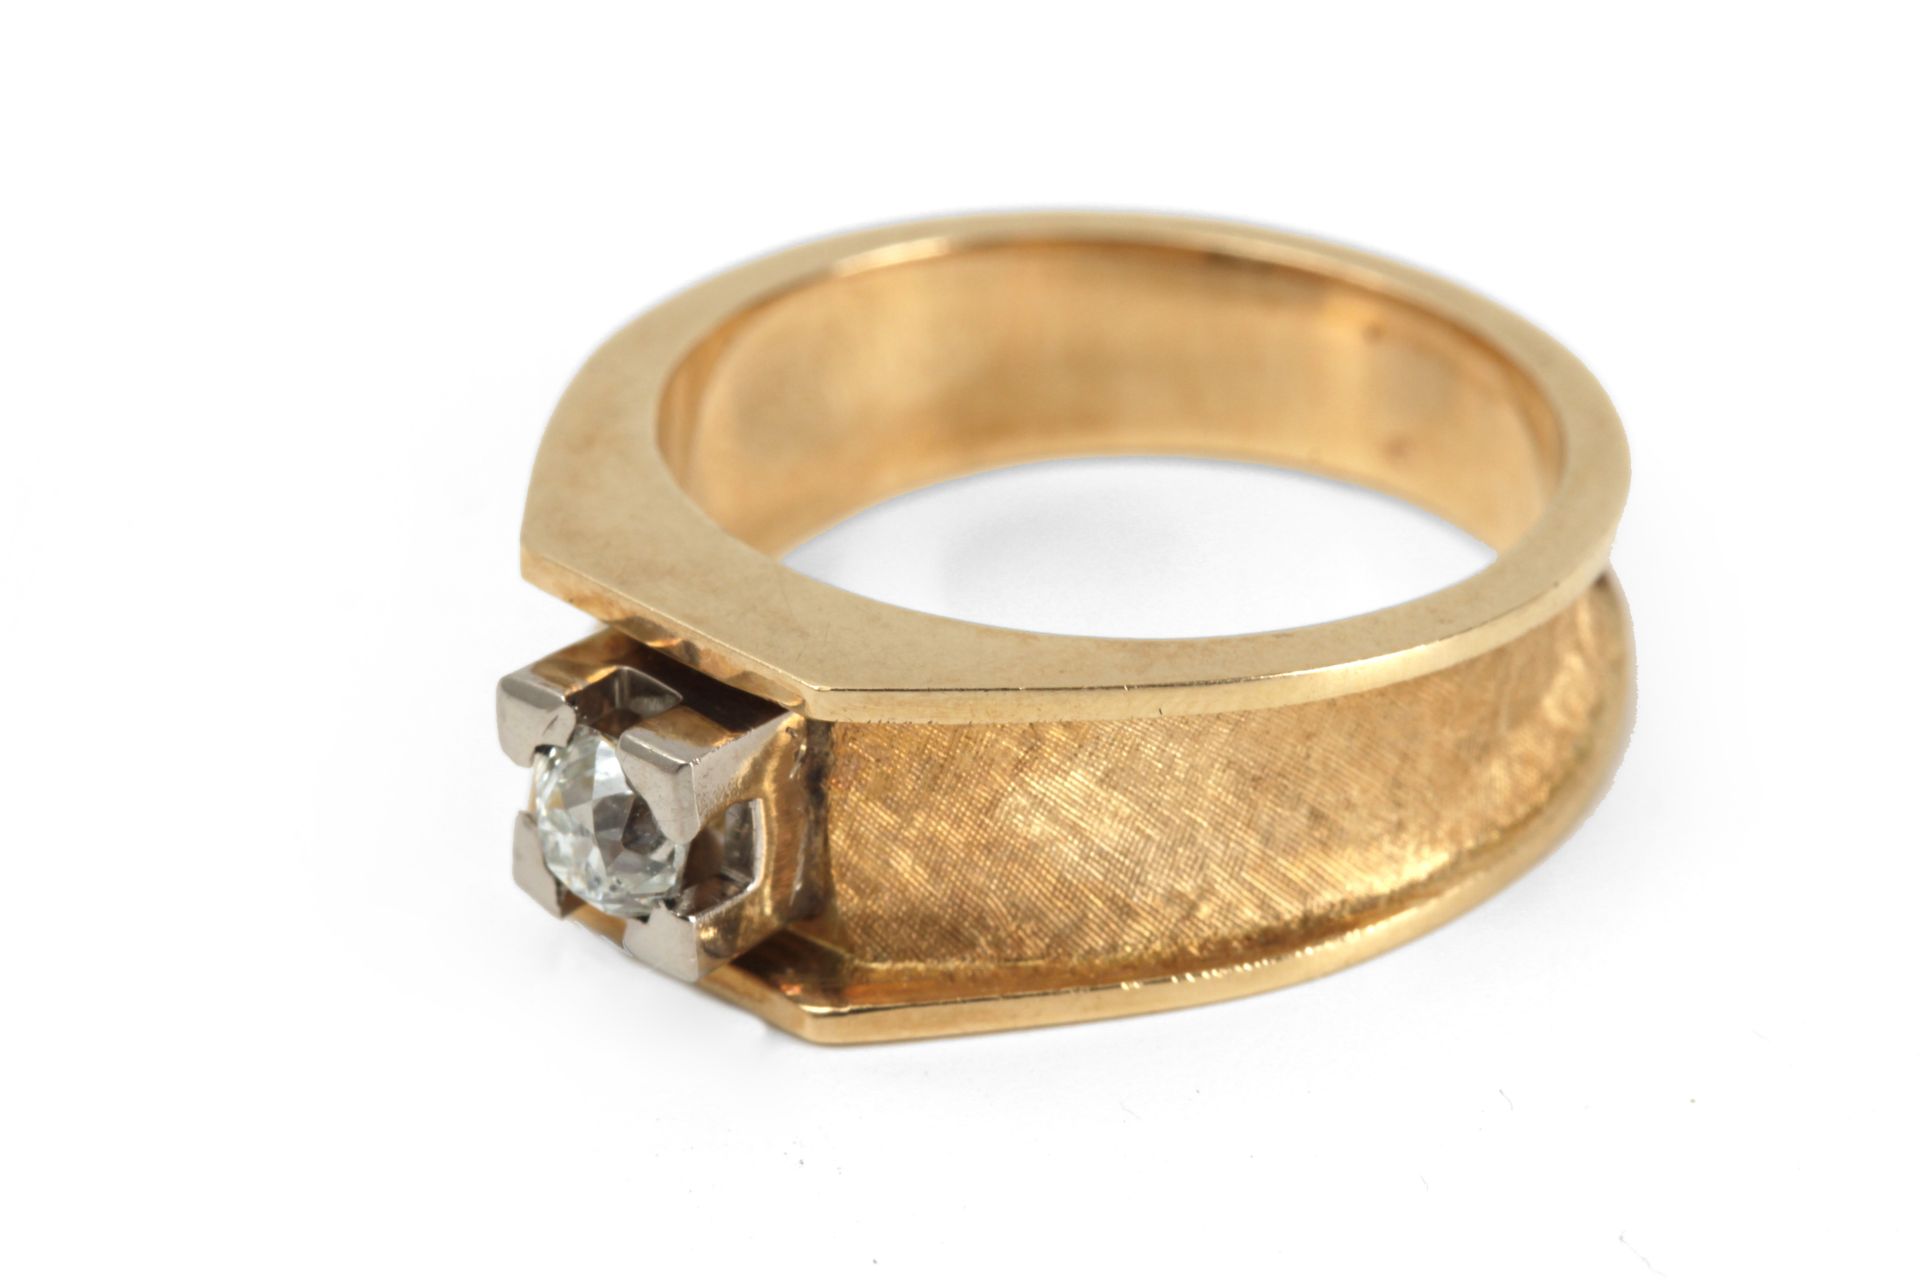 A 0,38 ct. old European cut diamond solitaire ring with an 18k. yellow gold and platinum setting - Image 4 of 4